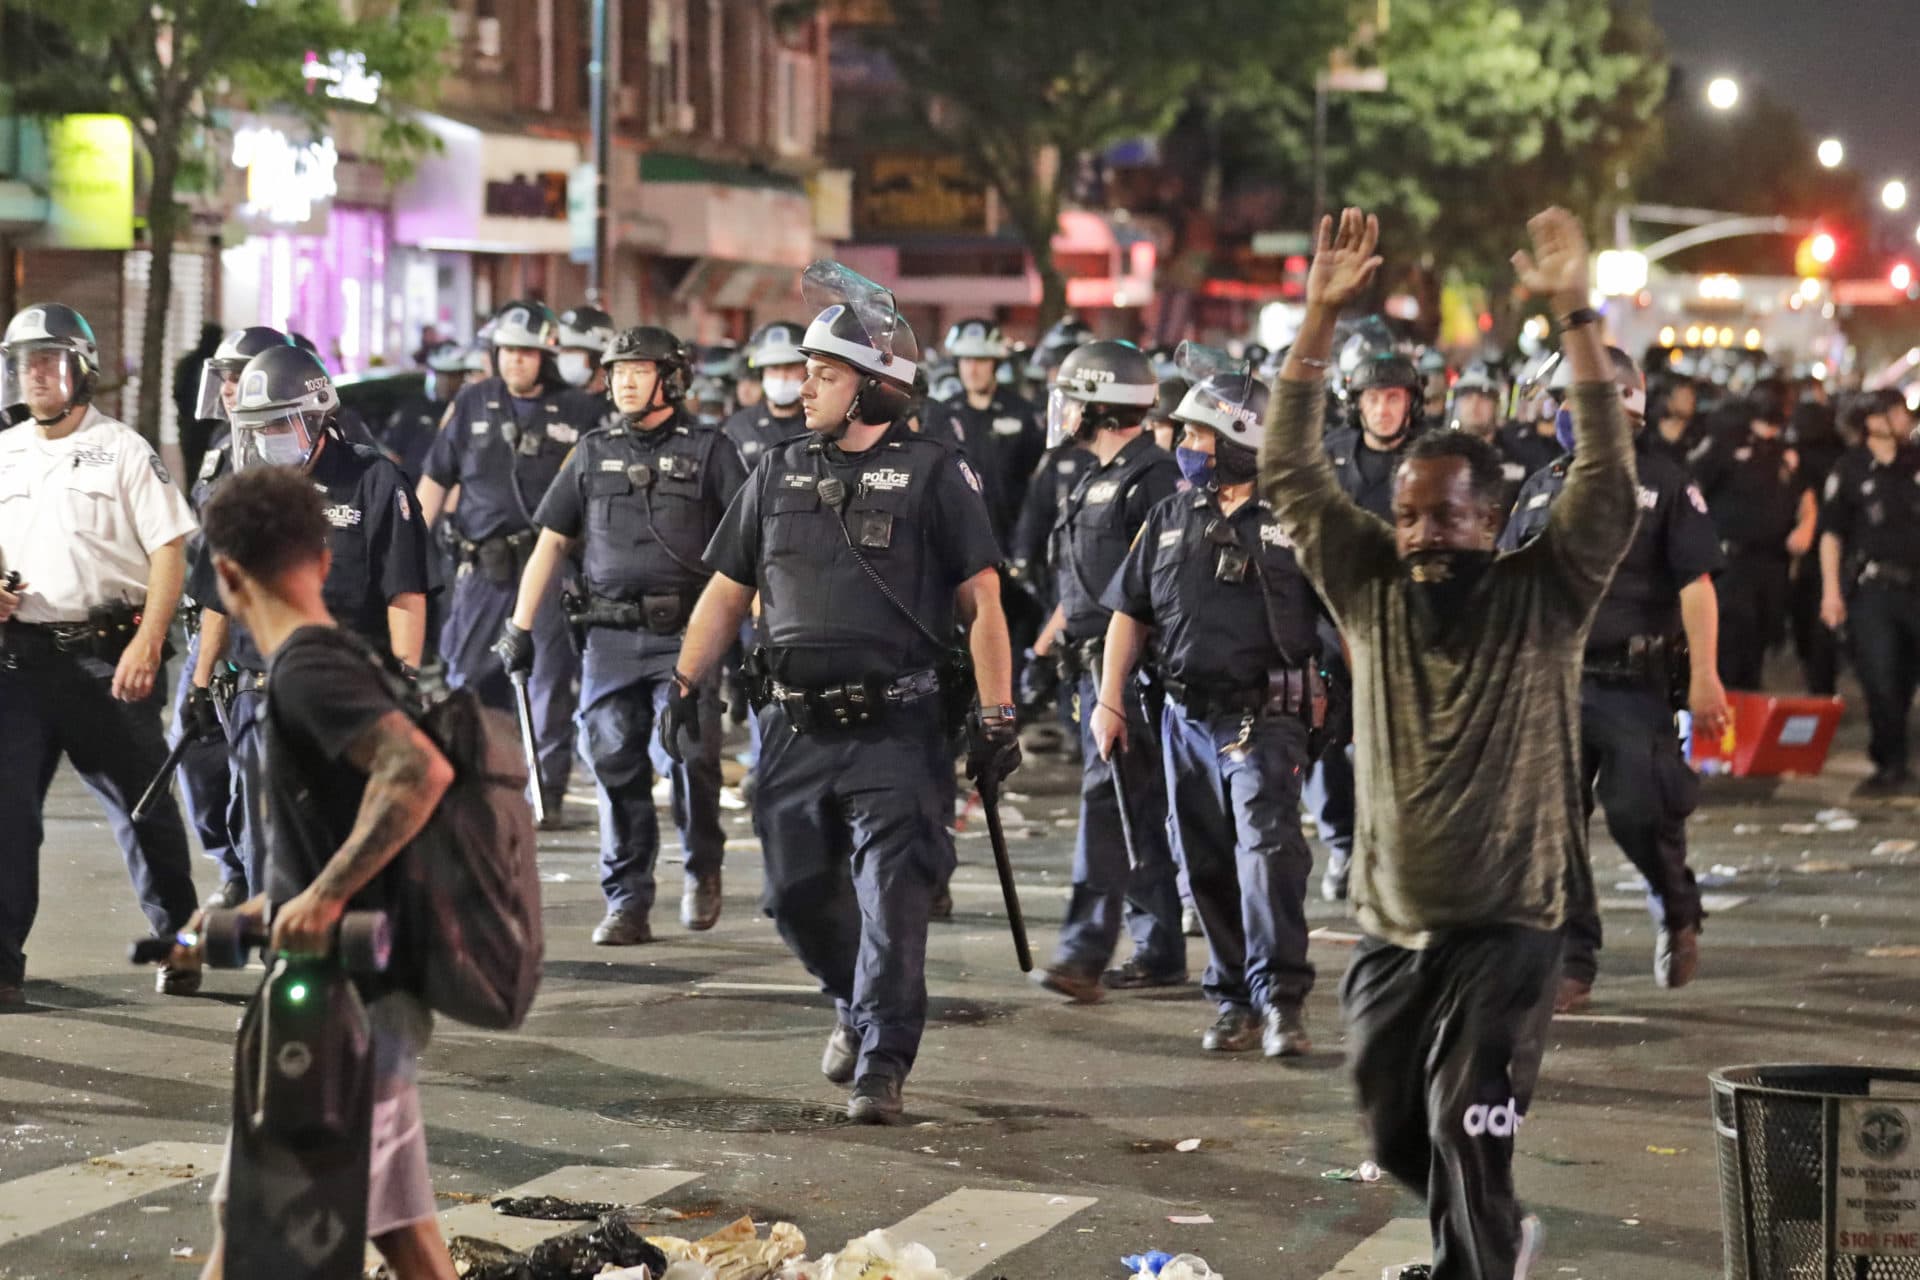 Police in riot gear walk down a street during protests in the Brooklyn borough of New York, Saturday, May 30, 2020. (AP Photo/Seth Wenig)